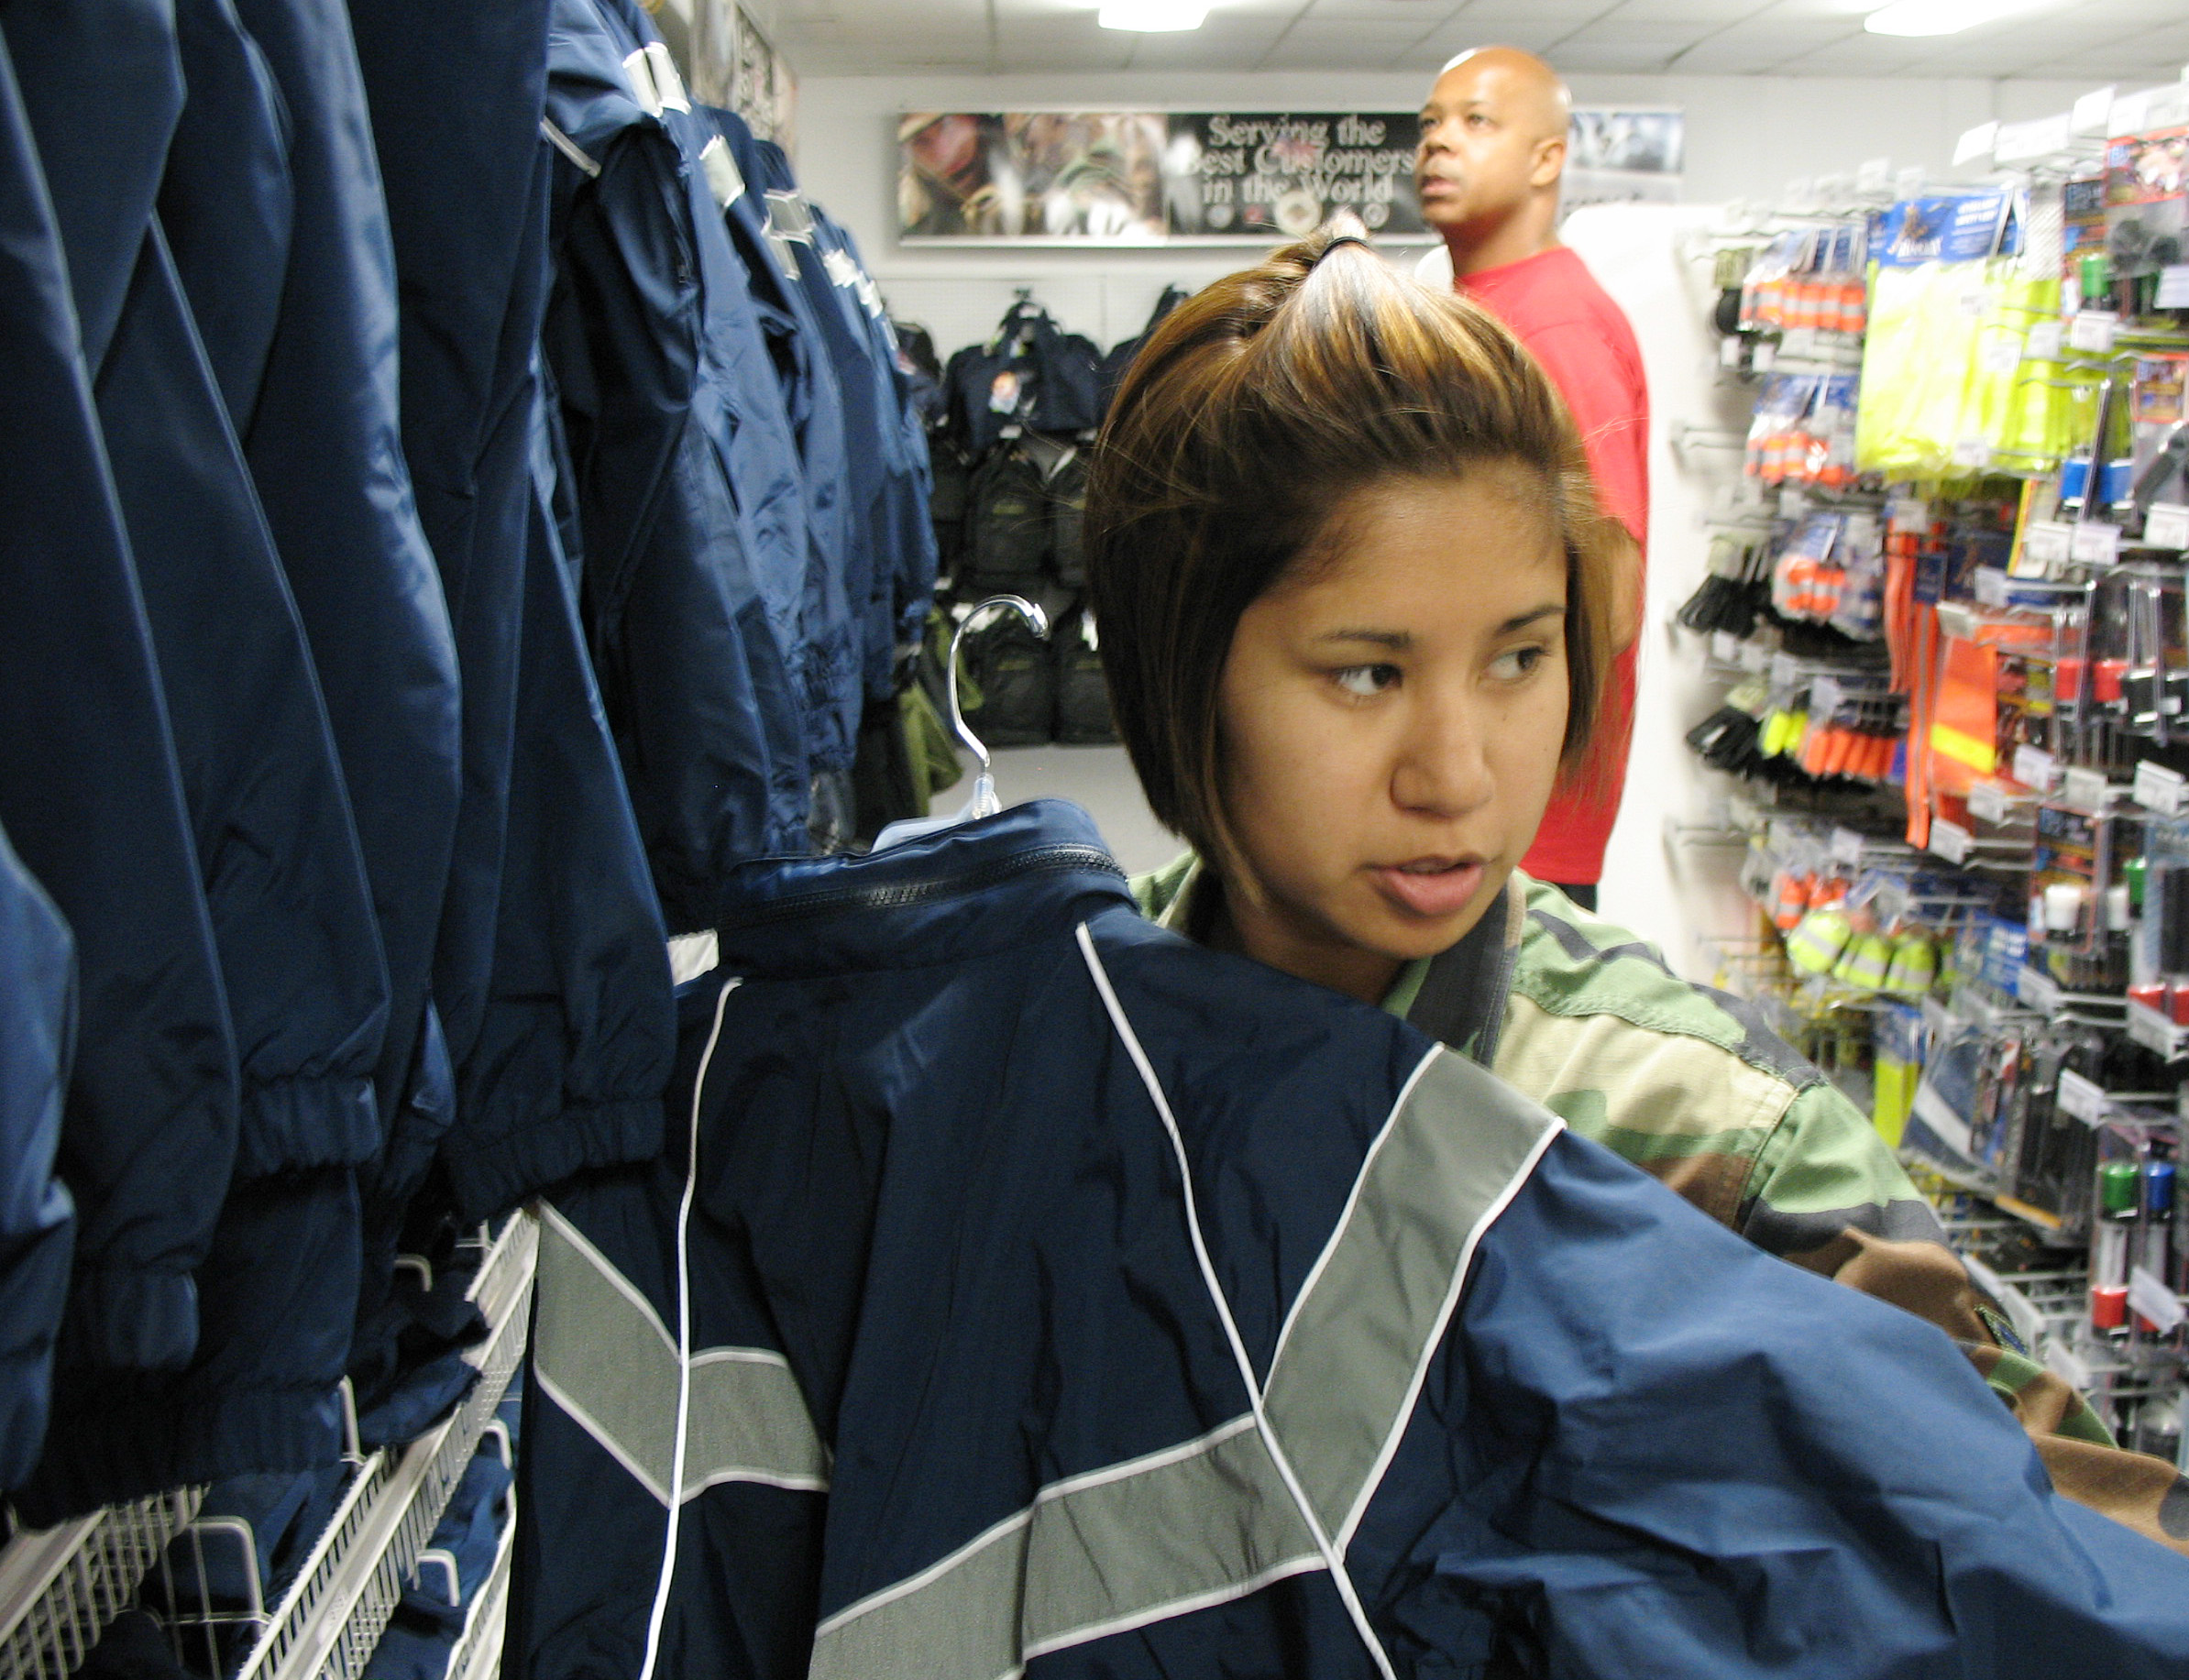 military clothing sales lackland